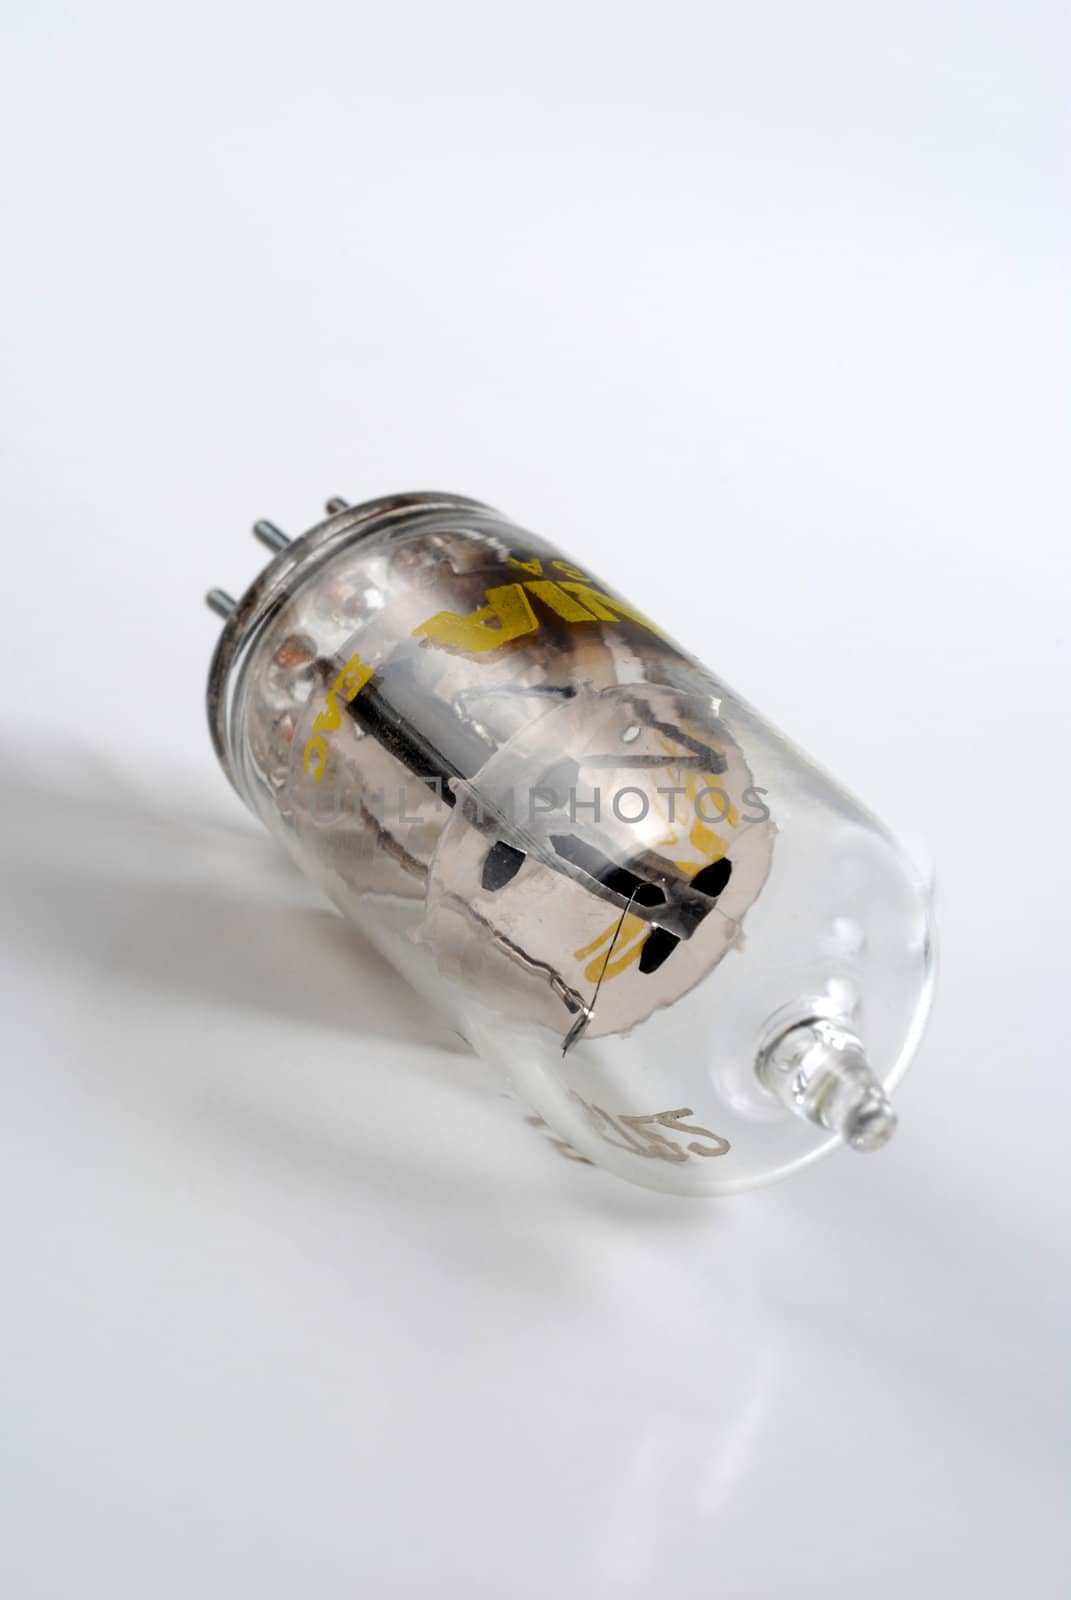 Stock pictures of a vacuum tube used in high end audion amplifiers